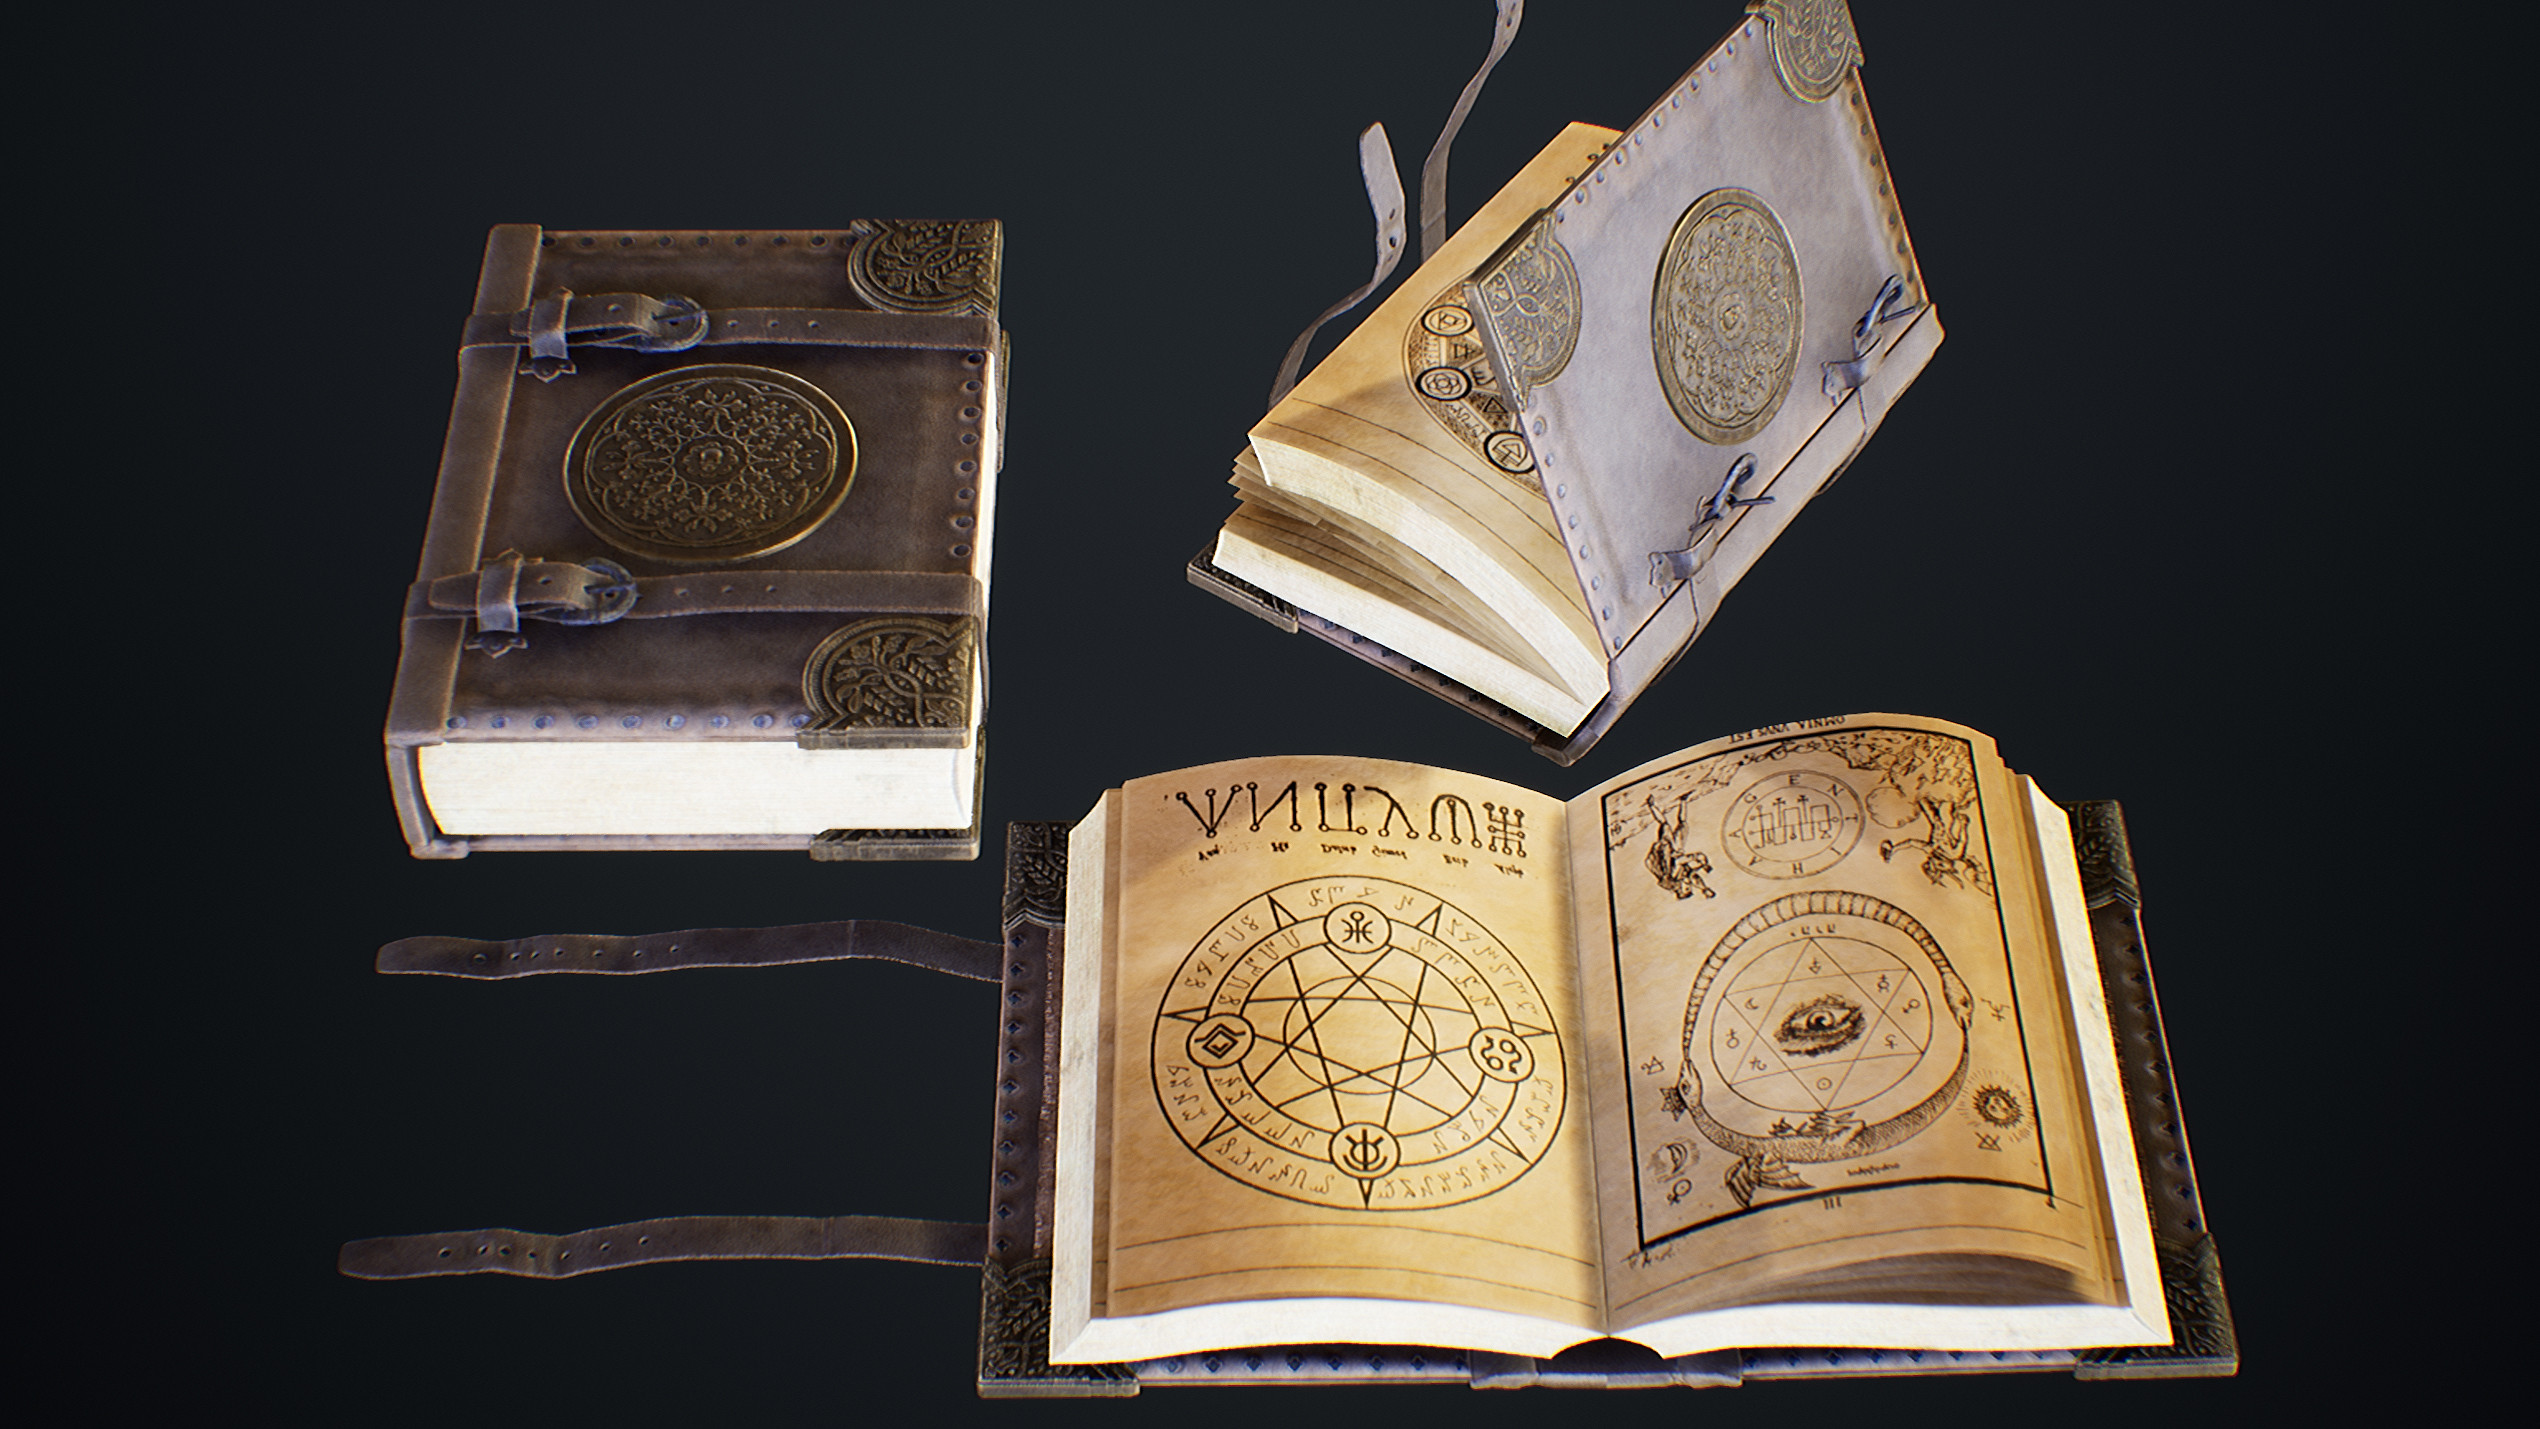 UE4 screenshot different animation state shot of the spellbook opening pages.